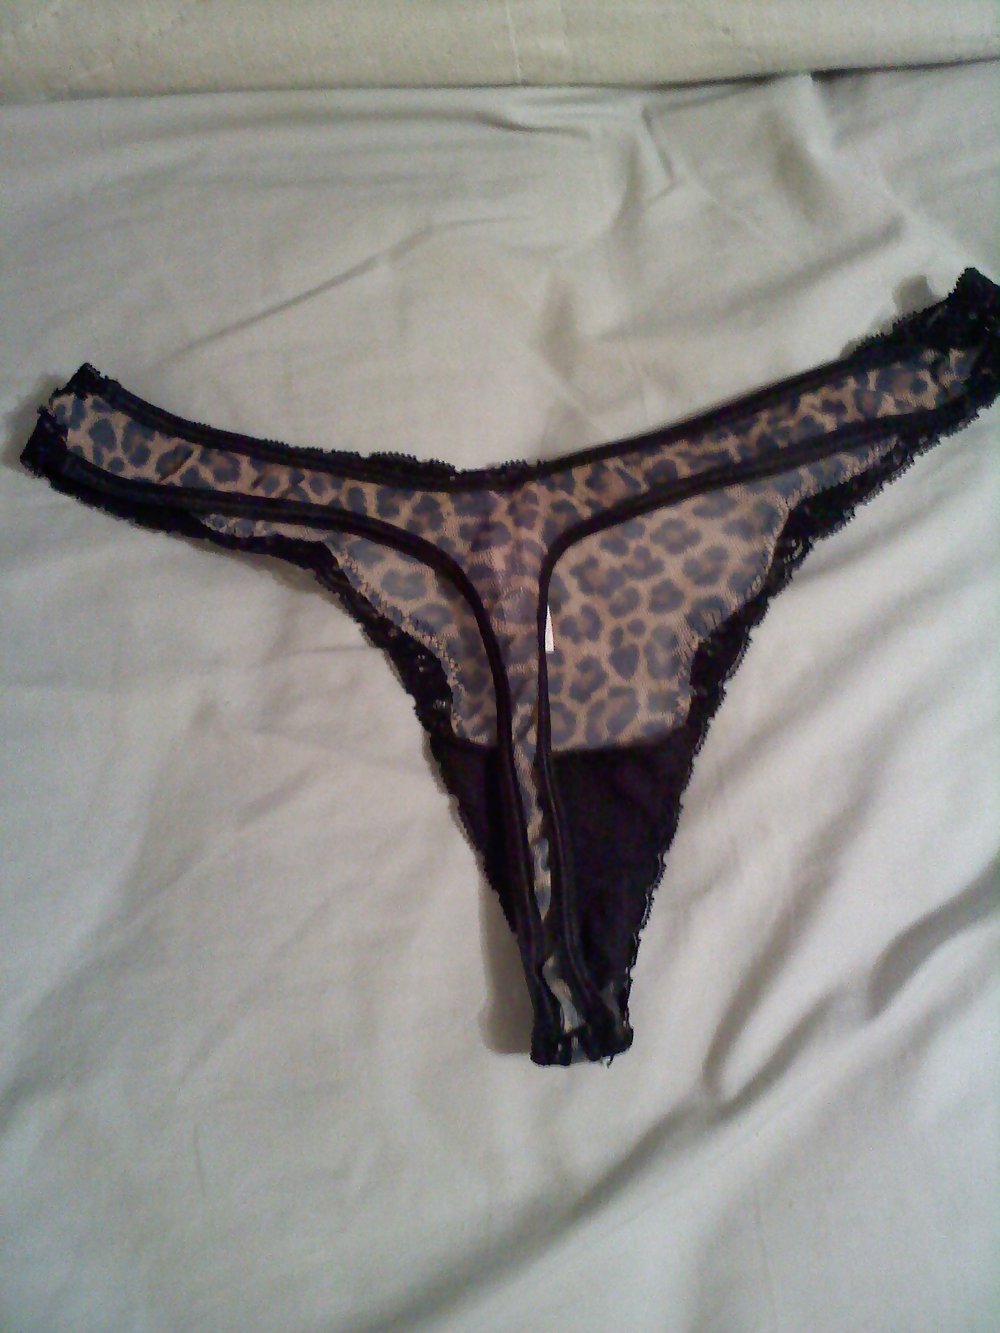 Thongs I took from my friends girlfriends room  #8222909